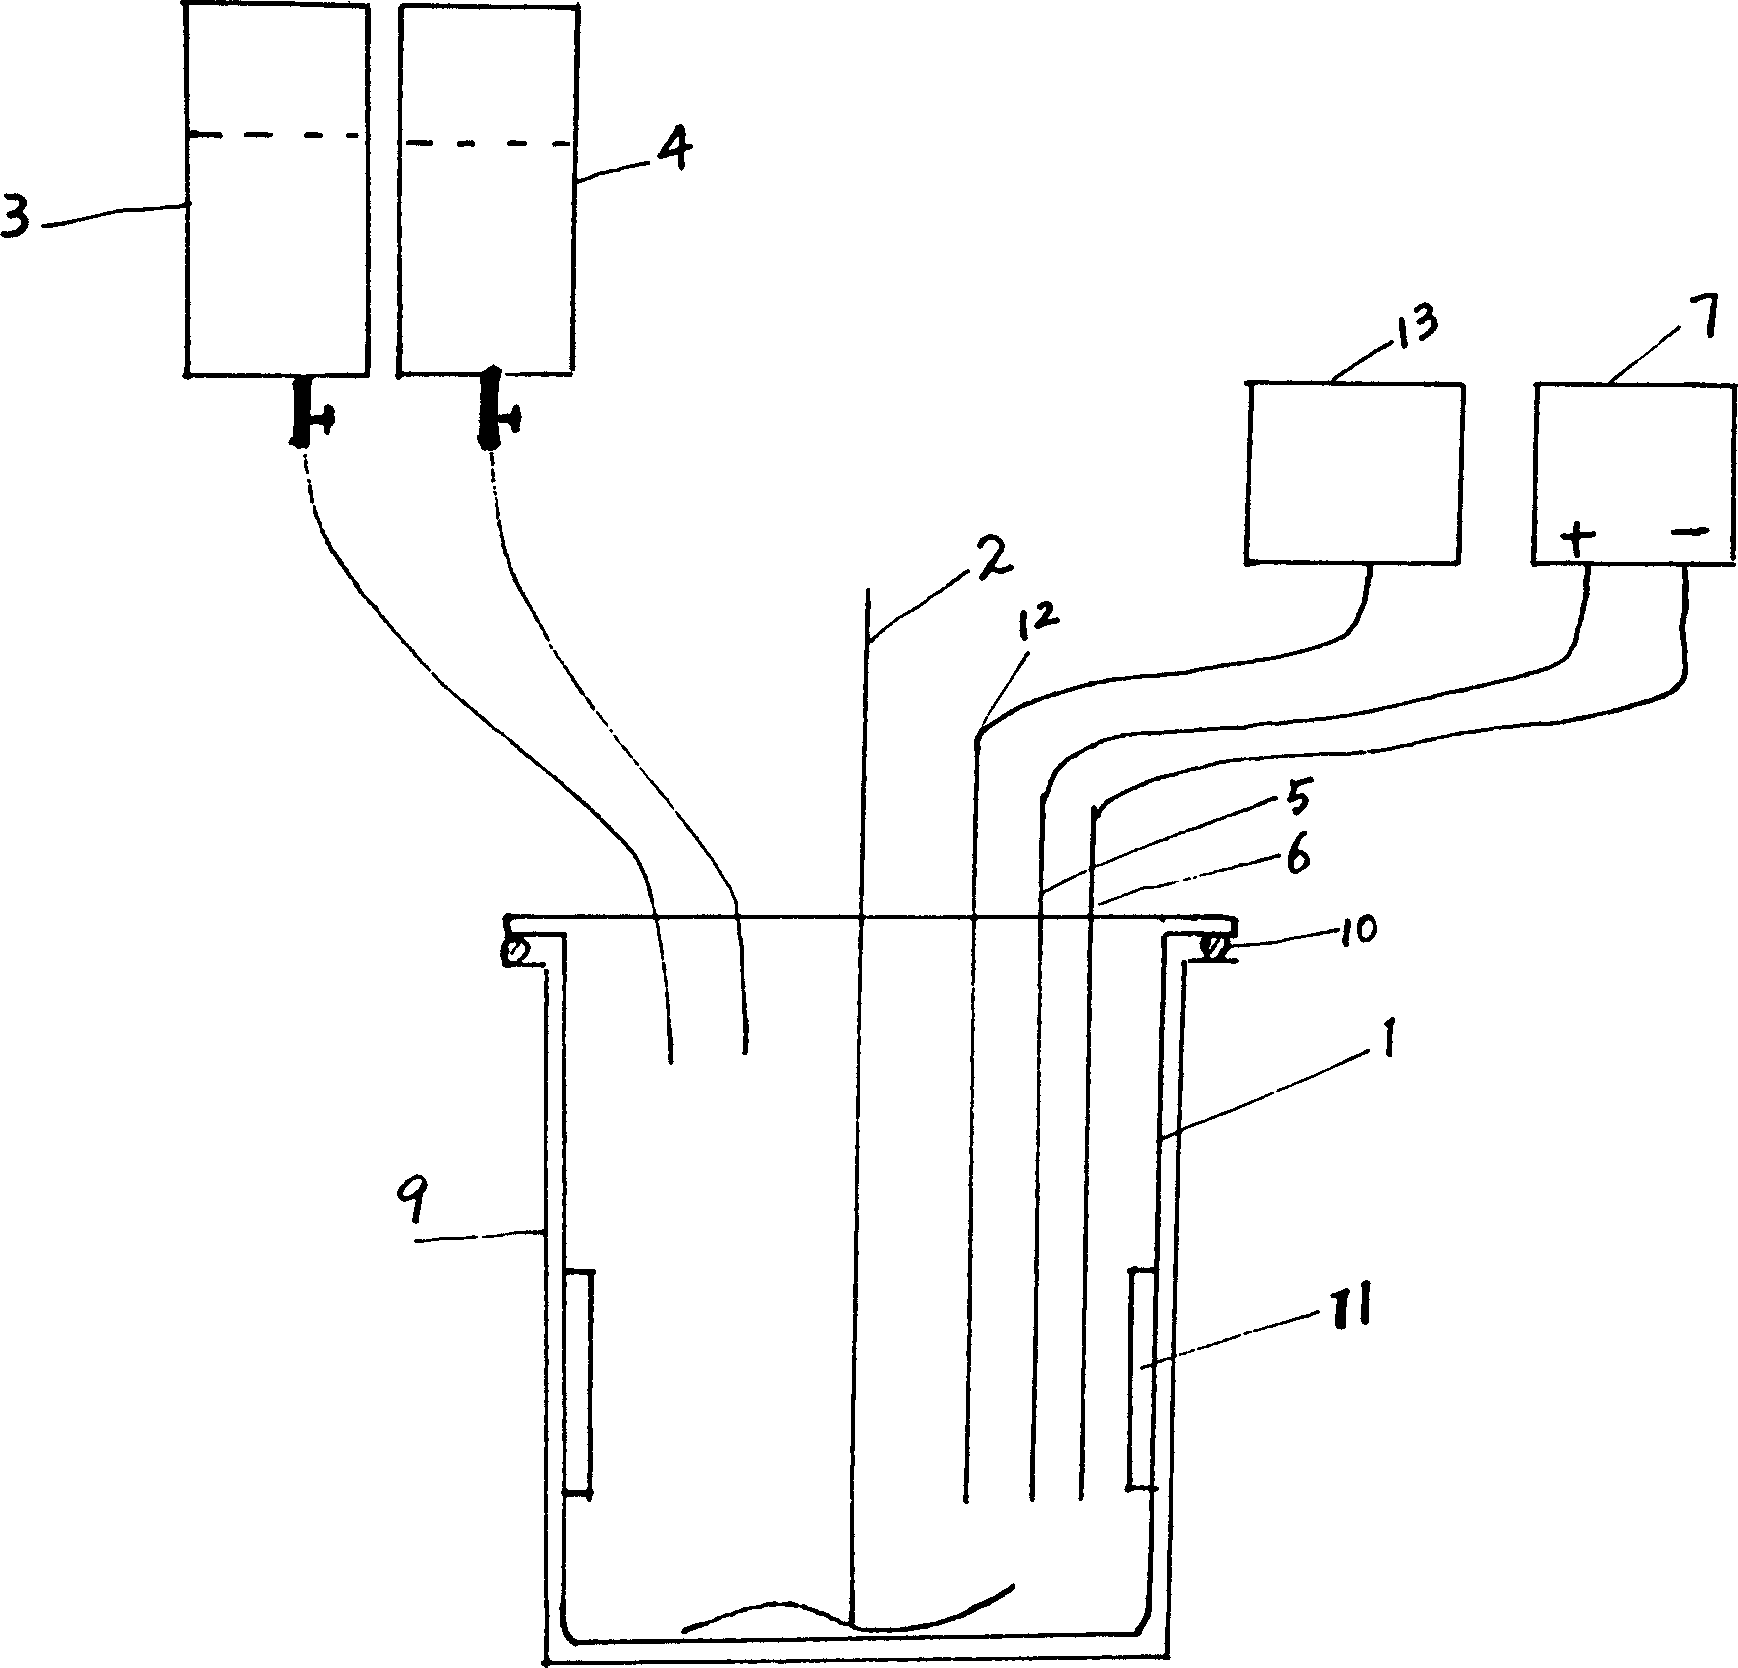 Method and apparatus for directly synthesizing auro-potassium cyanide by controlling electric potential